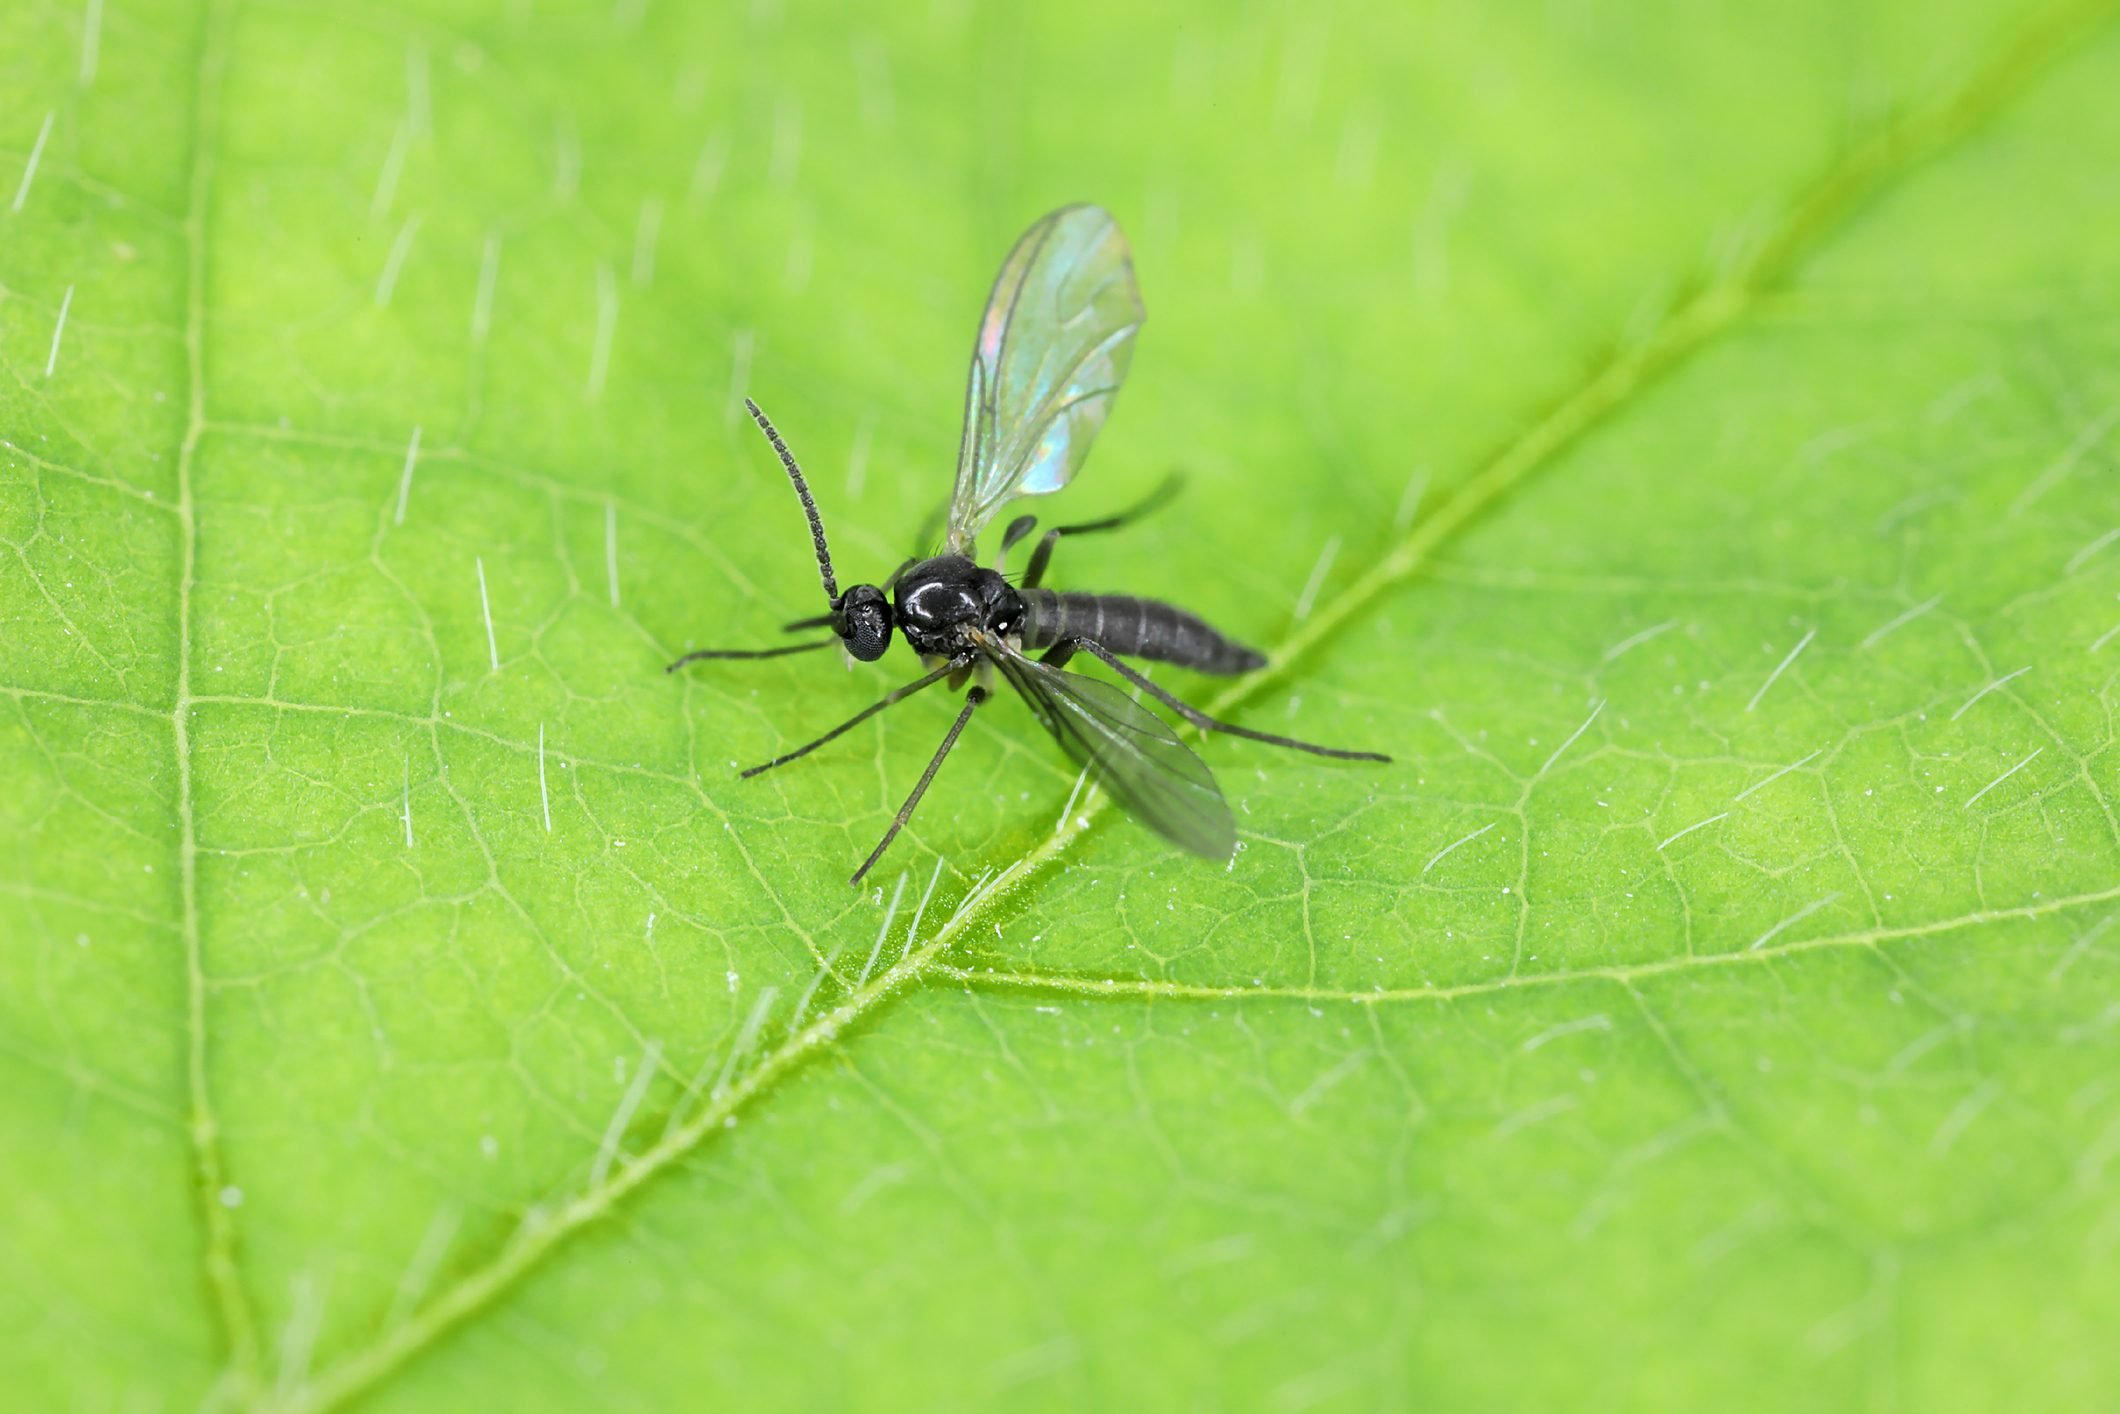 How to Get Rid of Fungus Gnats - Horticulture